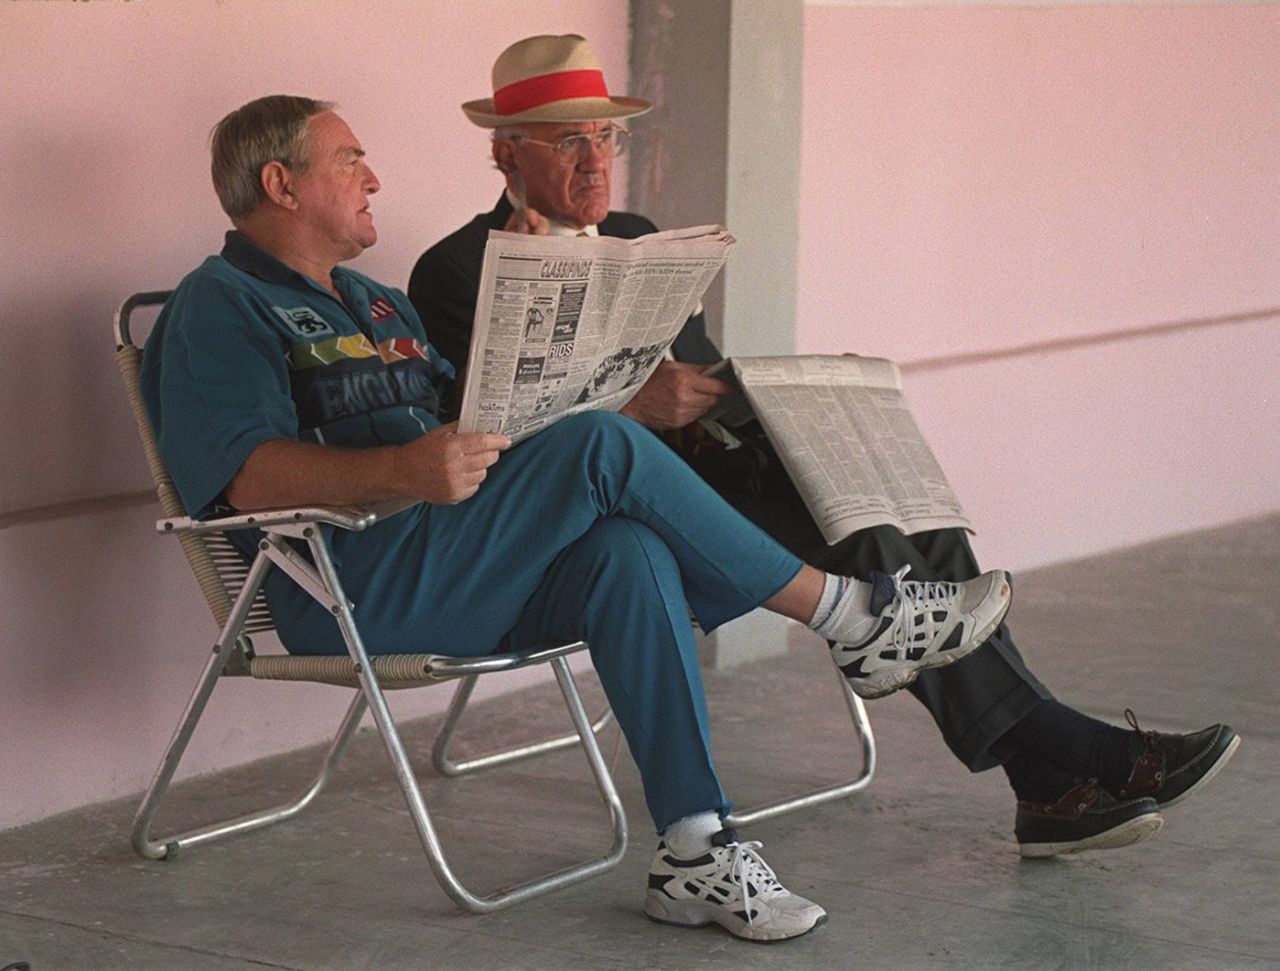 Dennis Silk with Ray Illingworth during the 1996 World Cup